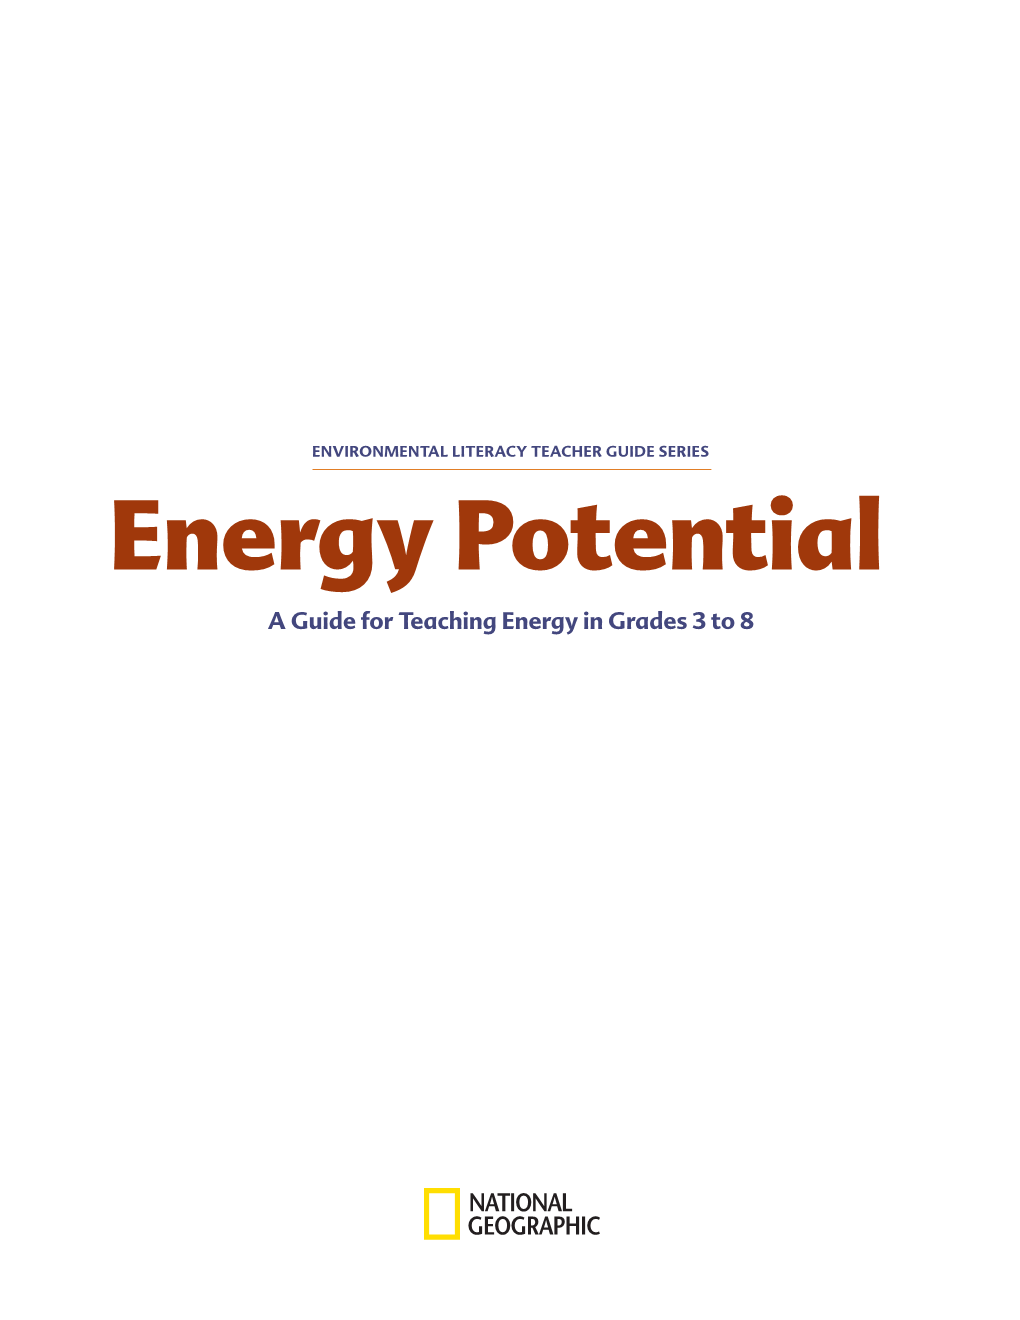 Energy Potential a Guide for Teaching Energy in Grades 3 to 8 Energy to Power Our World 3 by Nicole D